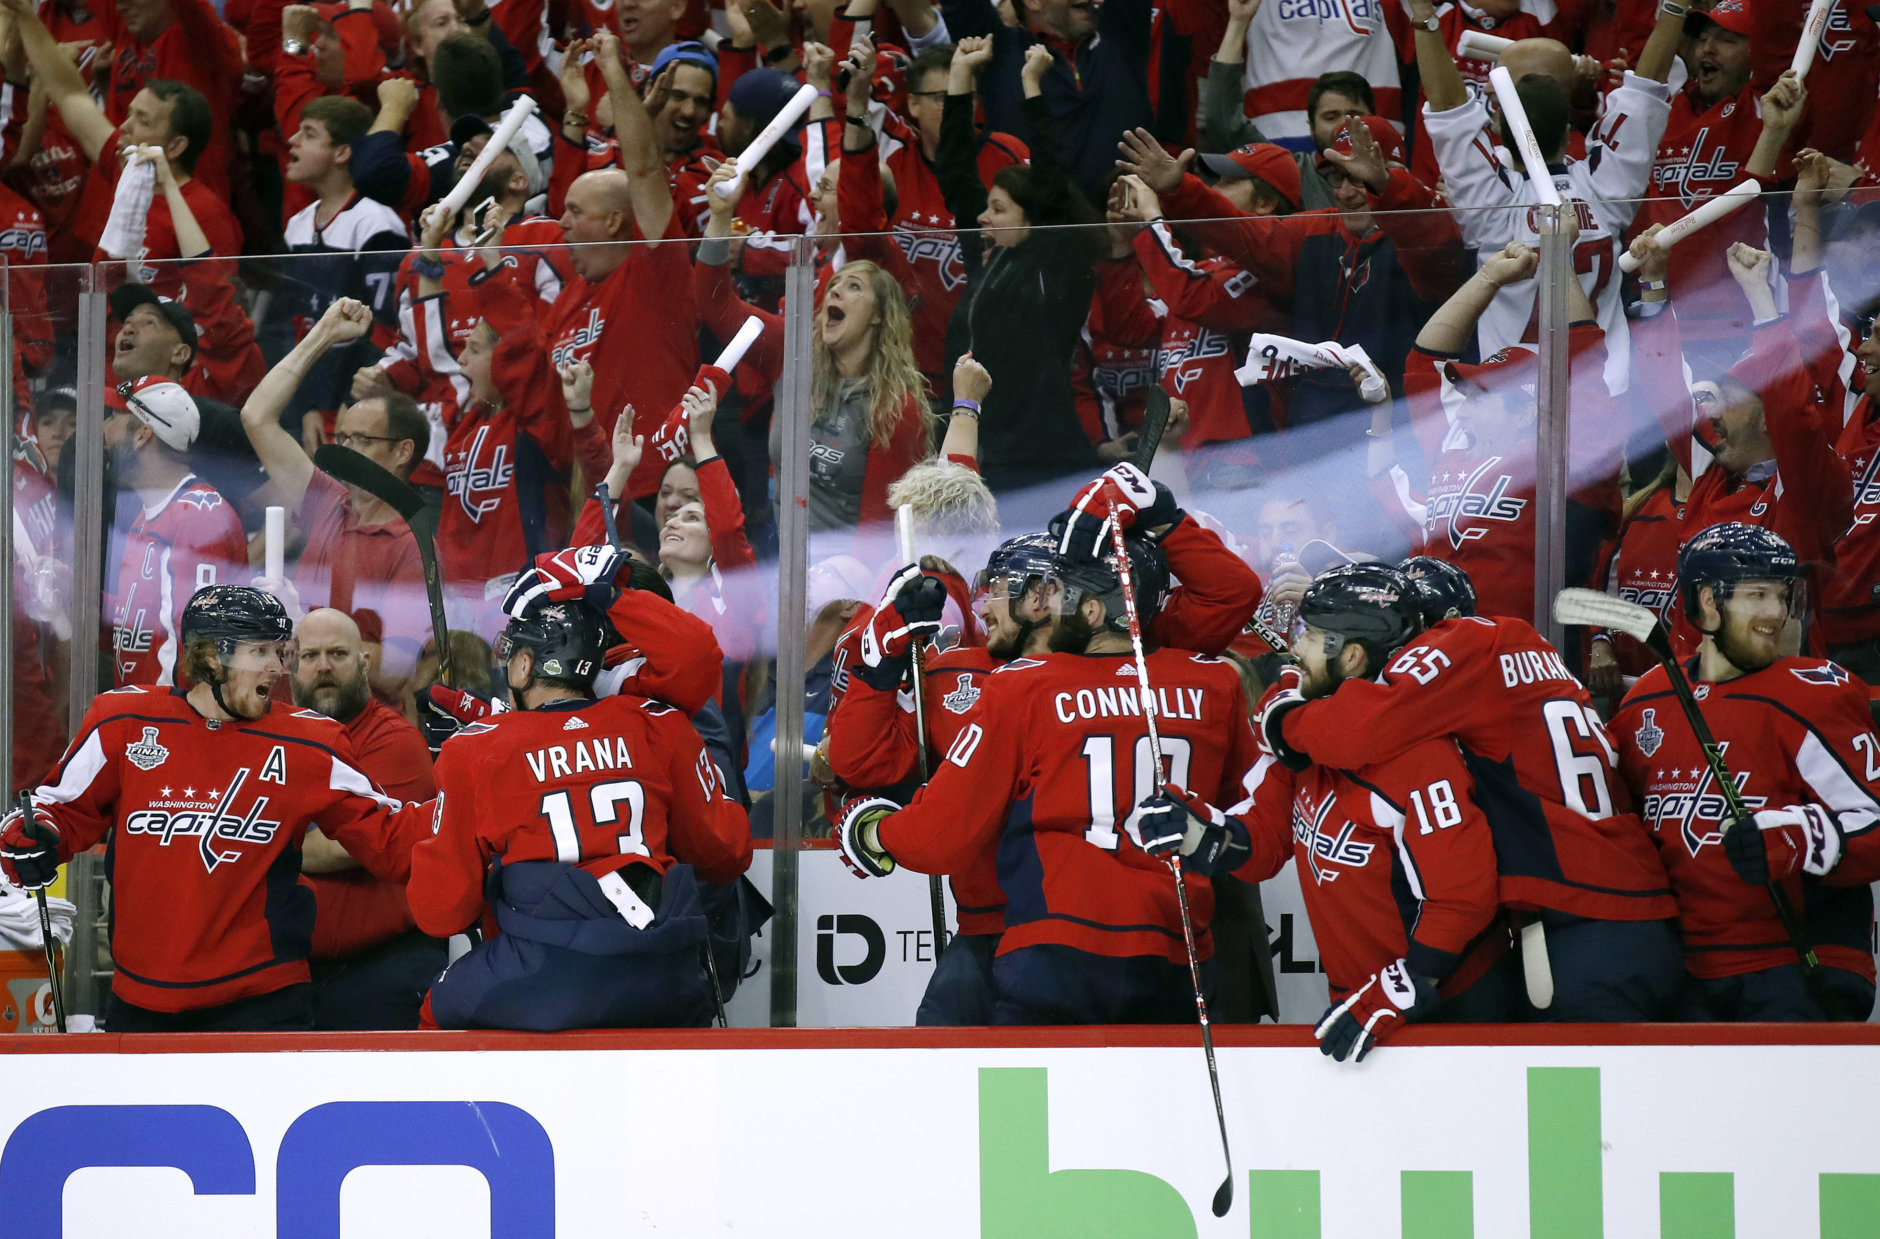 Washington Capitals players and fans celebrate one of their three goals against the Vegas Golden Knights during the first period in Game 4 of the NHL hockey Stanley Cup Final, Monday, June 4, 2018, in Washington. (AP Photo/Alex Brandon)